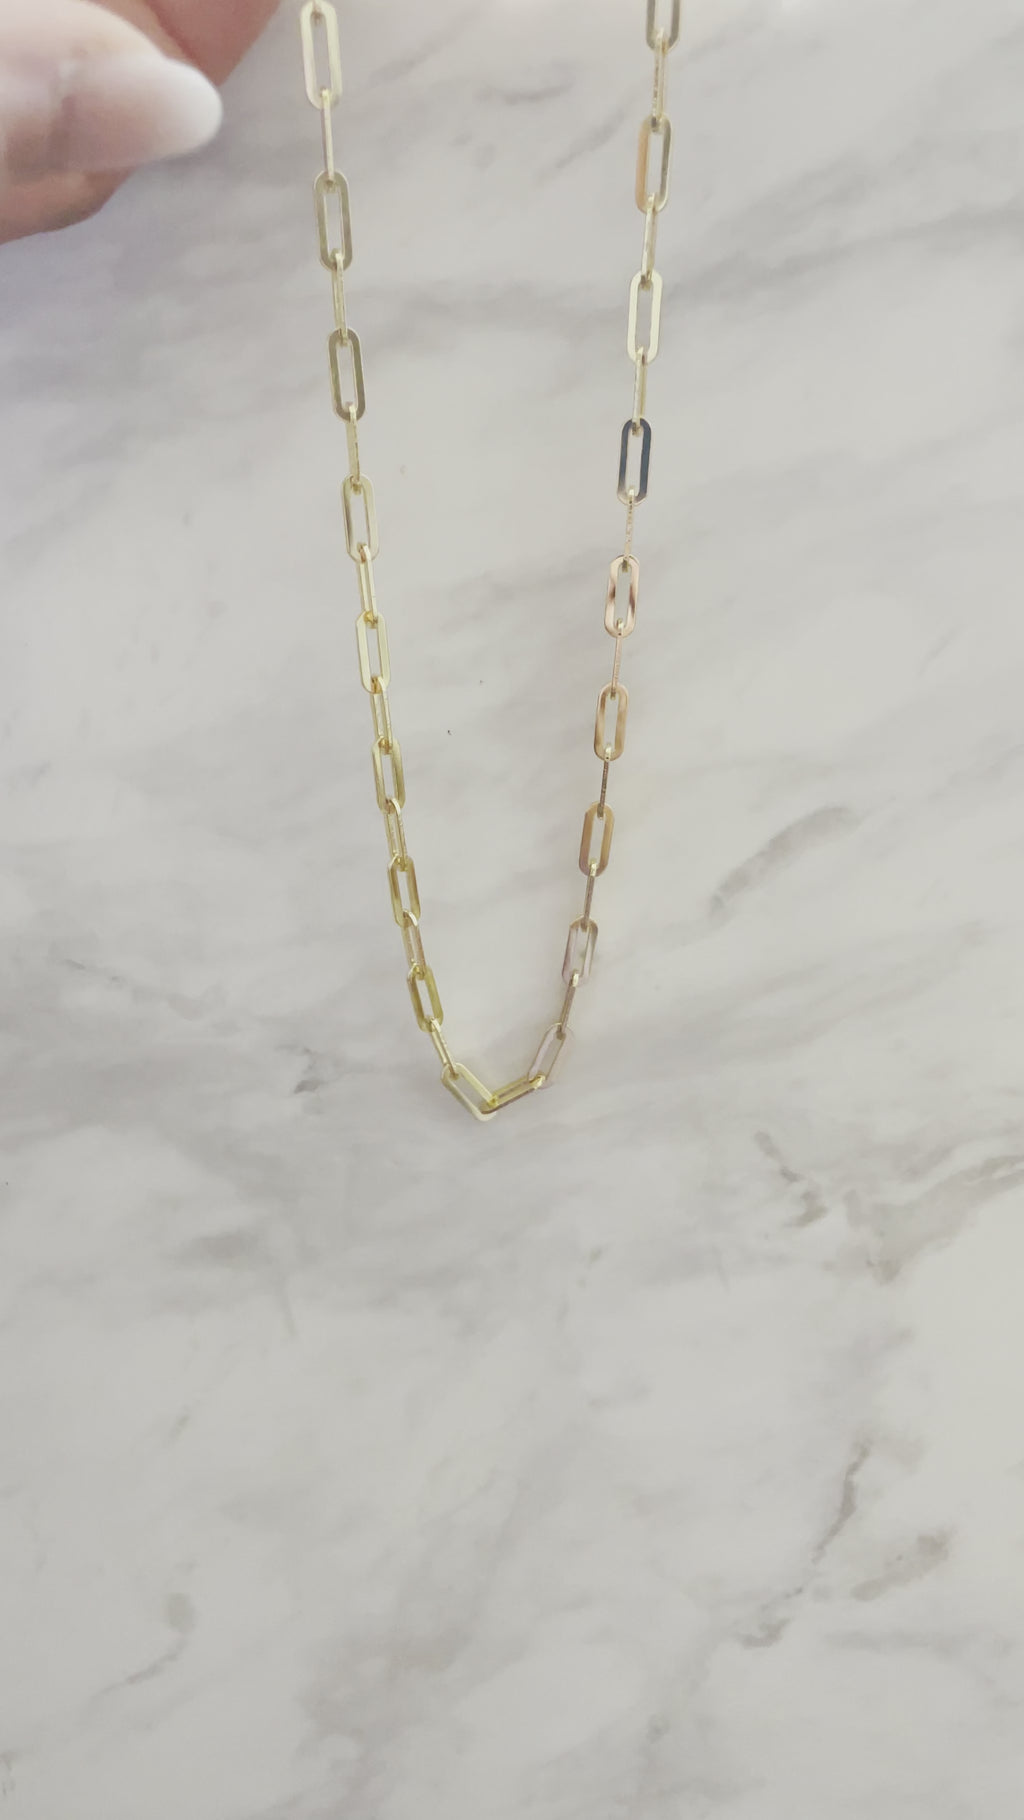 Shiny and elegant Gold Filled Paperclip Chain against a marble background.